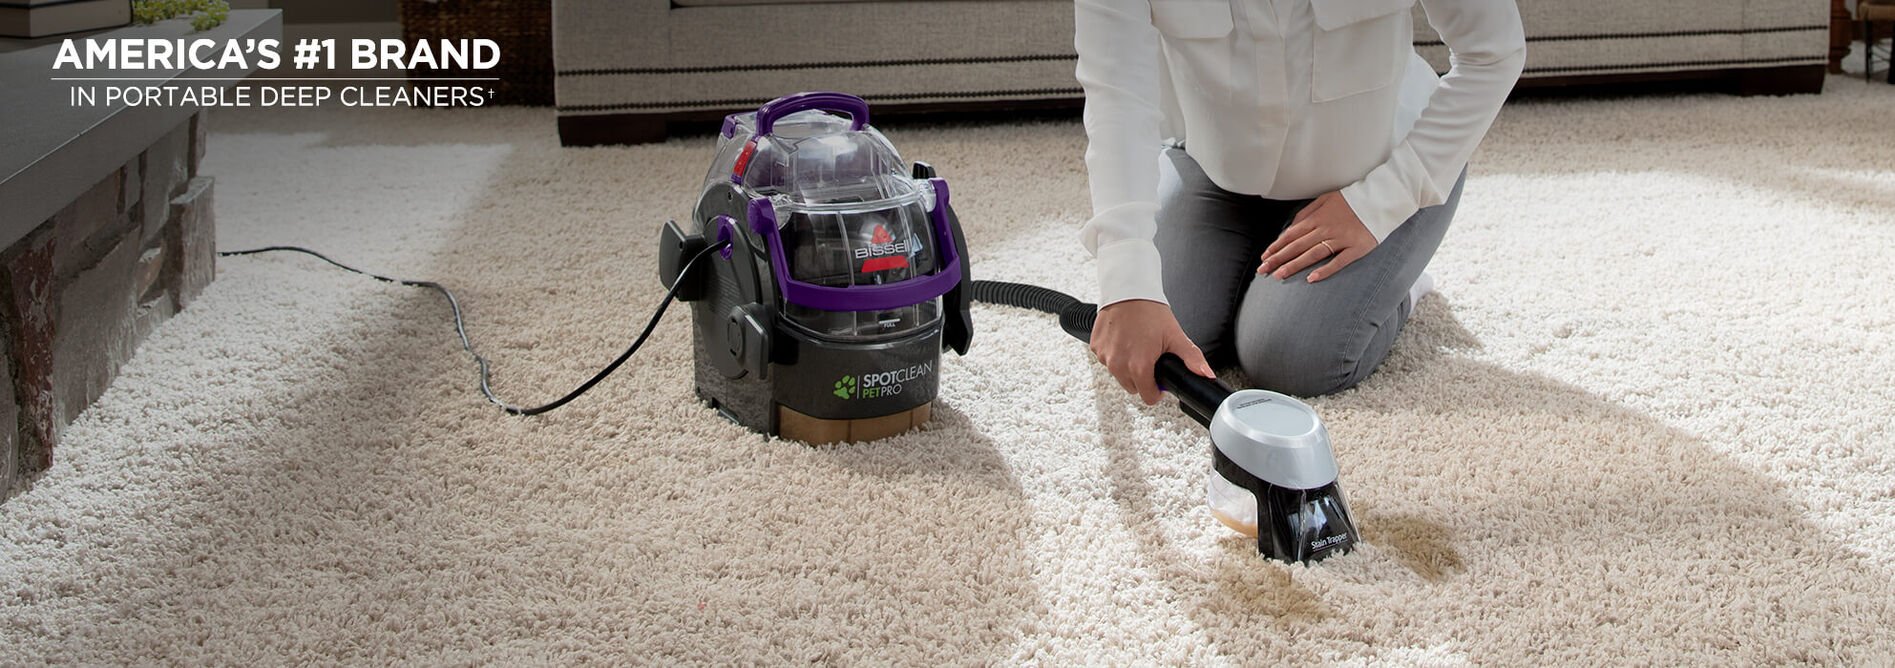 BISSELL Cylinder Carpet Cleaners SpotCleaner Pet/SpotClean